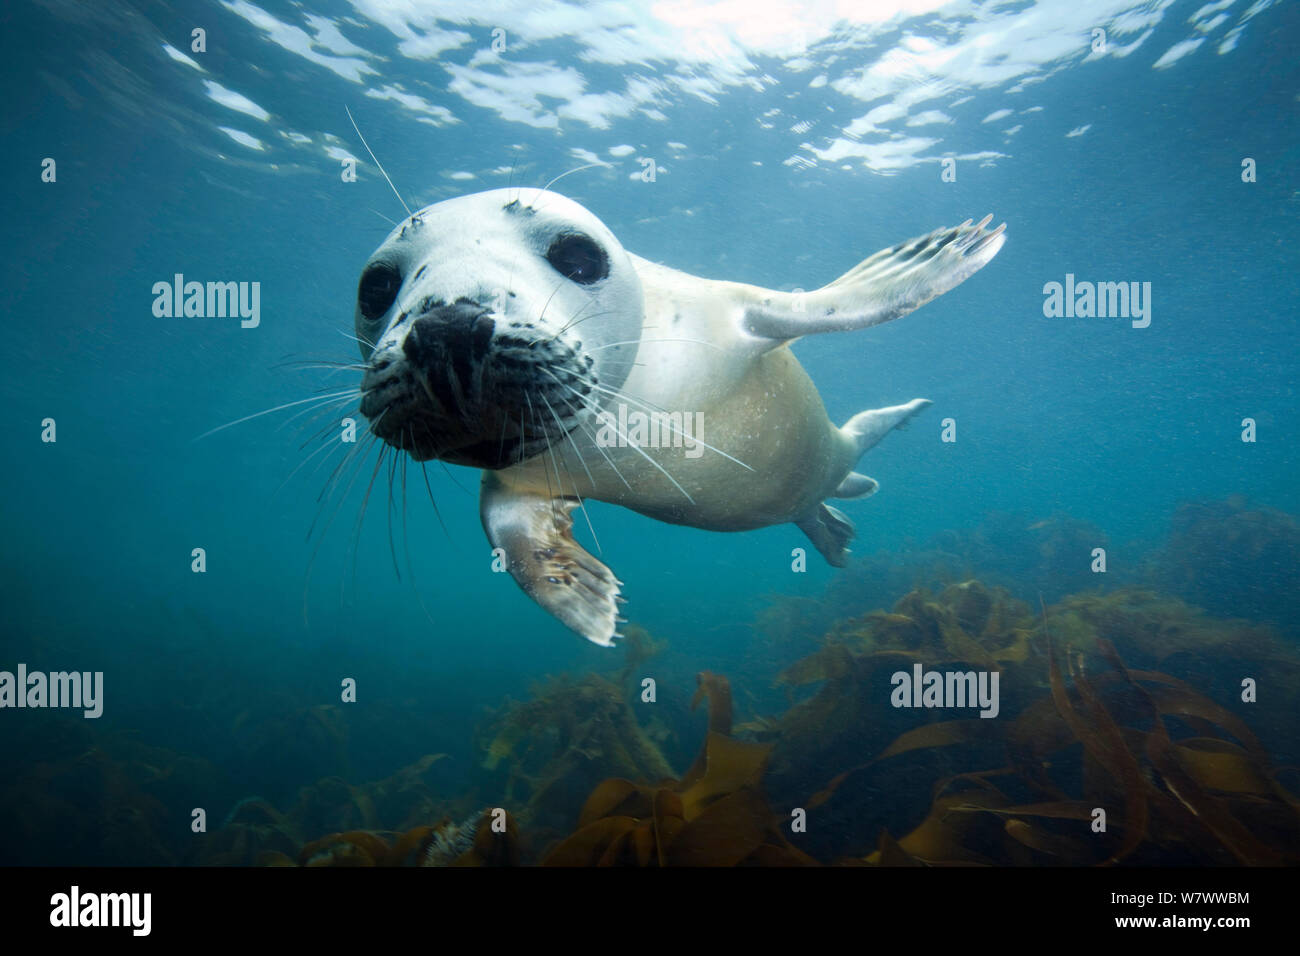 Atlantic Grey Seal (Halichoerus grypus) approaching camera with curiosity, The Isles of Scilly. Stock Photo